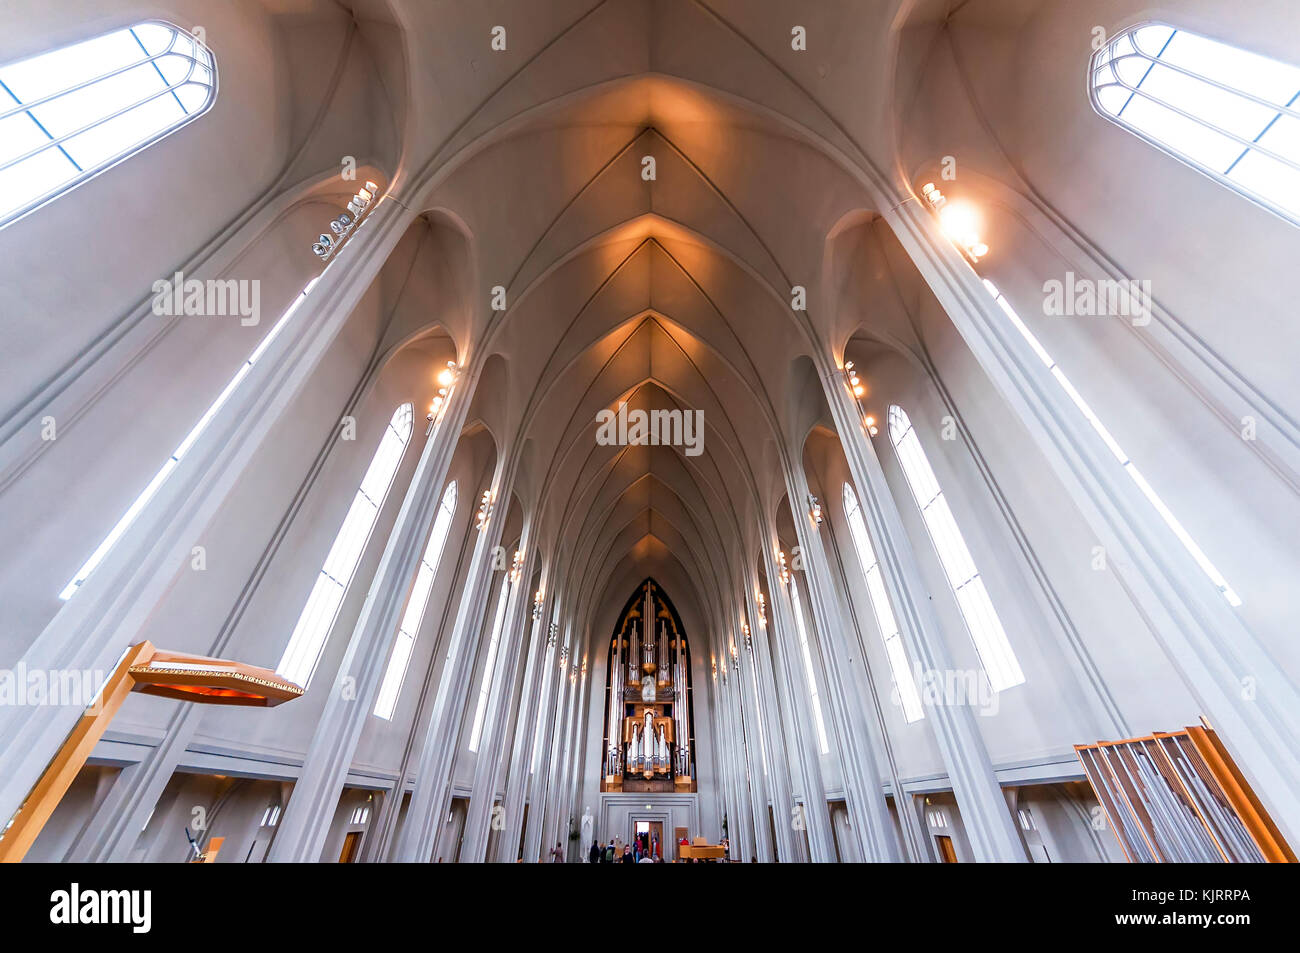 Reykjavik, Iceland - August 05, 2012: View of the central nave of Hallgrimskirkja church. Stock Photo